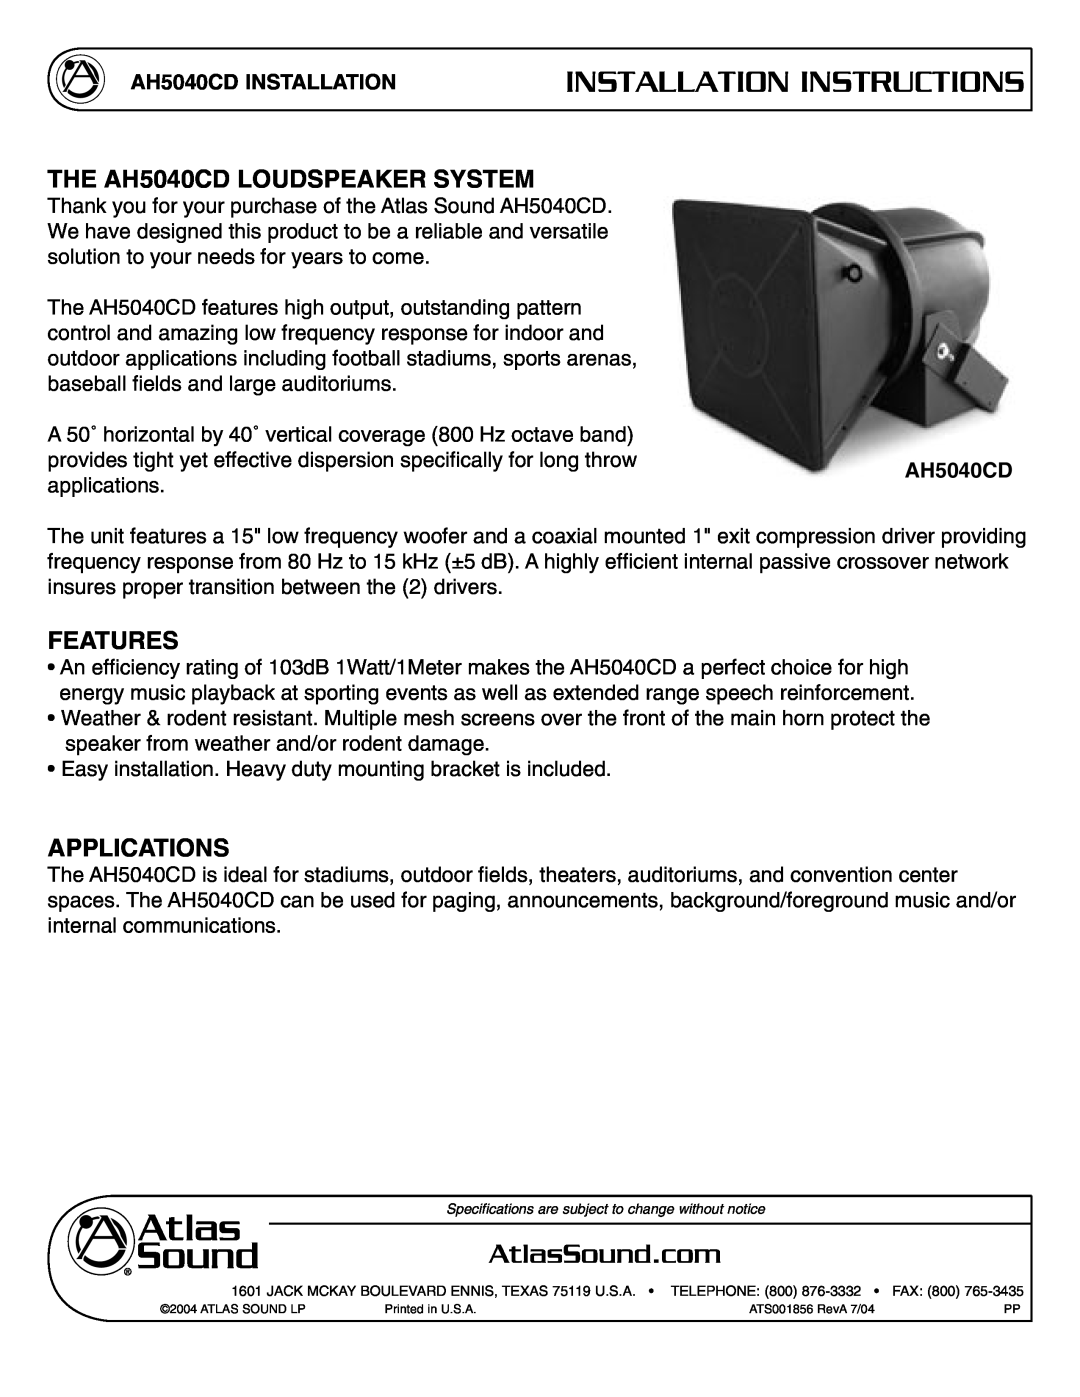 Atlas Sound specifications THE AH5040CD LOUDSPEAKER SYSTEM, Features, Applications, Installation Instructions 